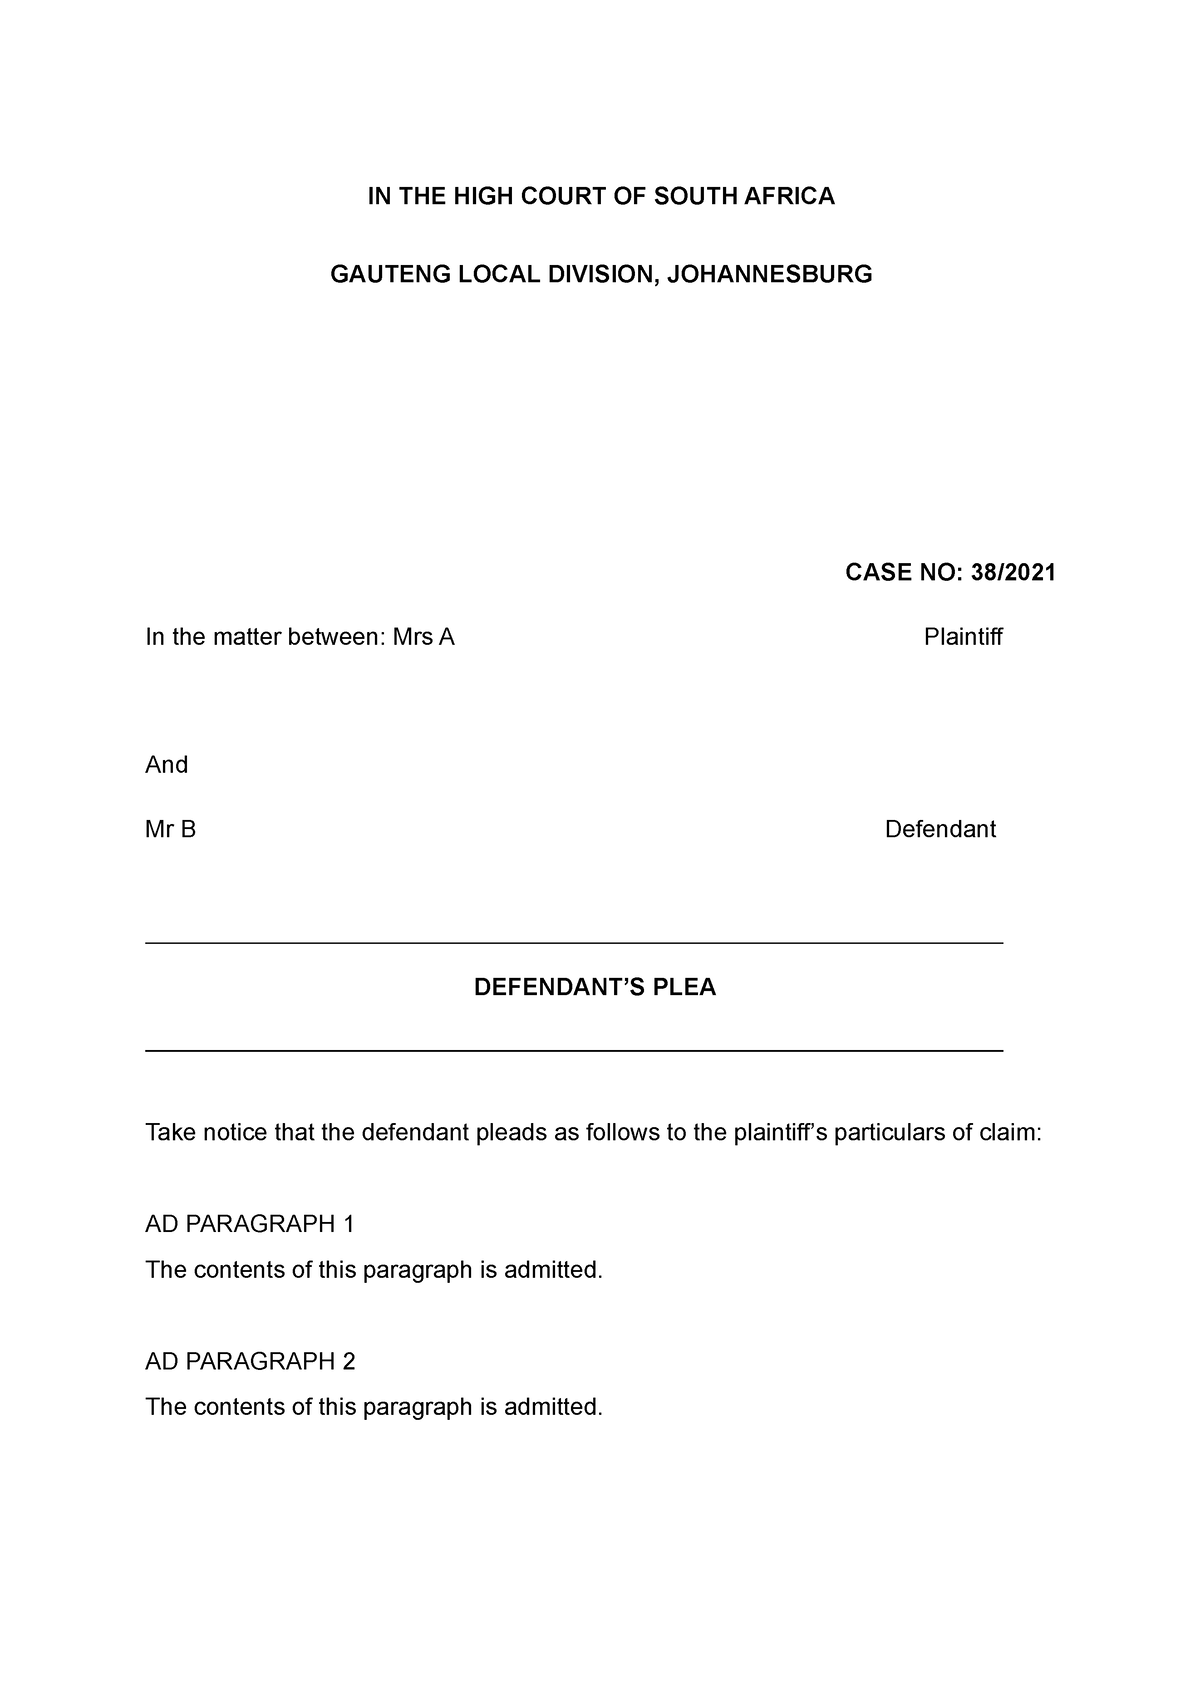 Plea and counterclaim template IN THE HIGH COURT OF SOUTH AFRICA